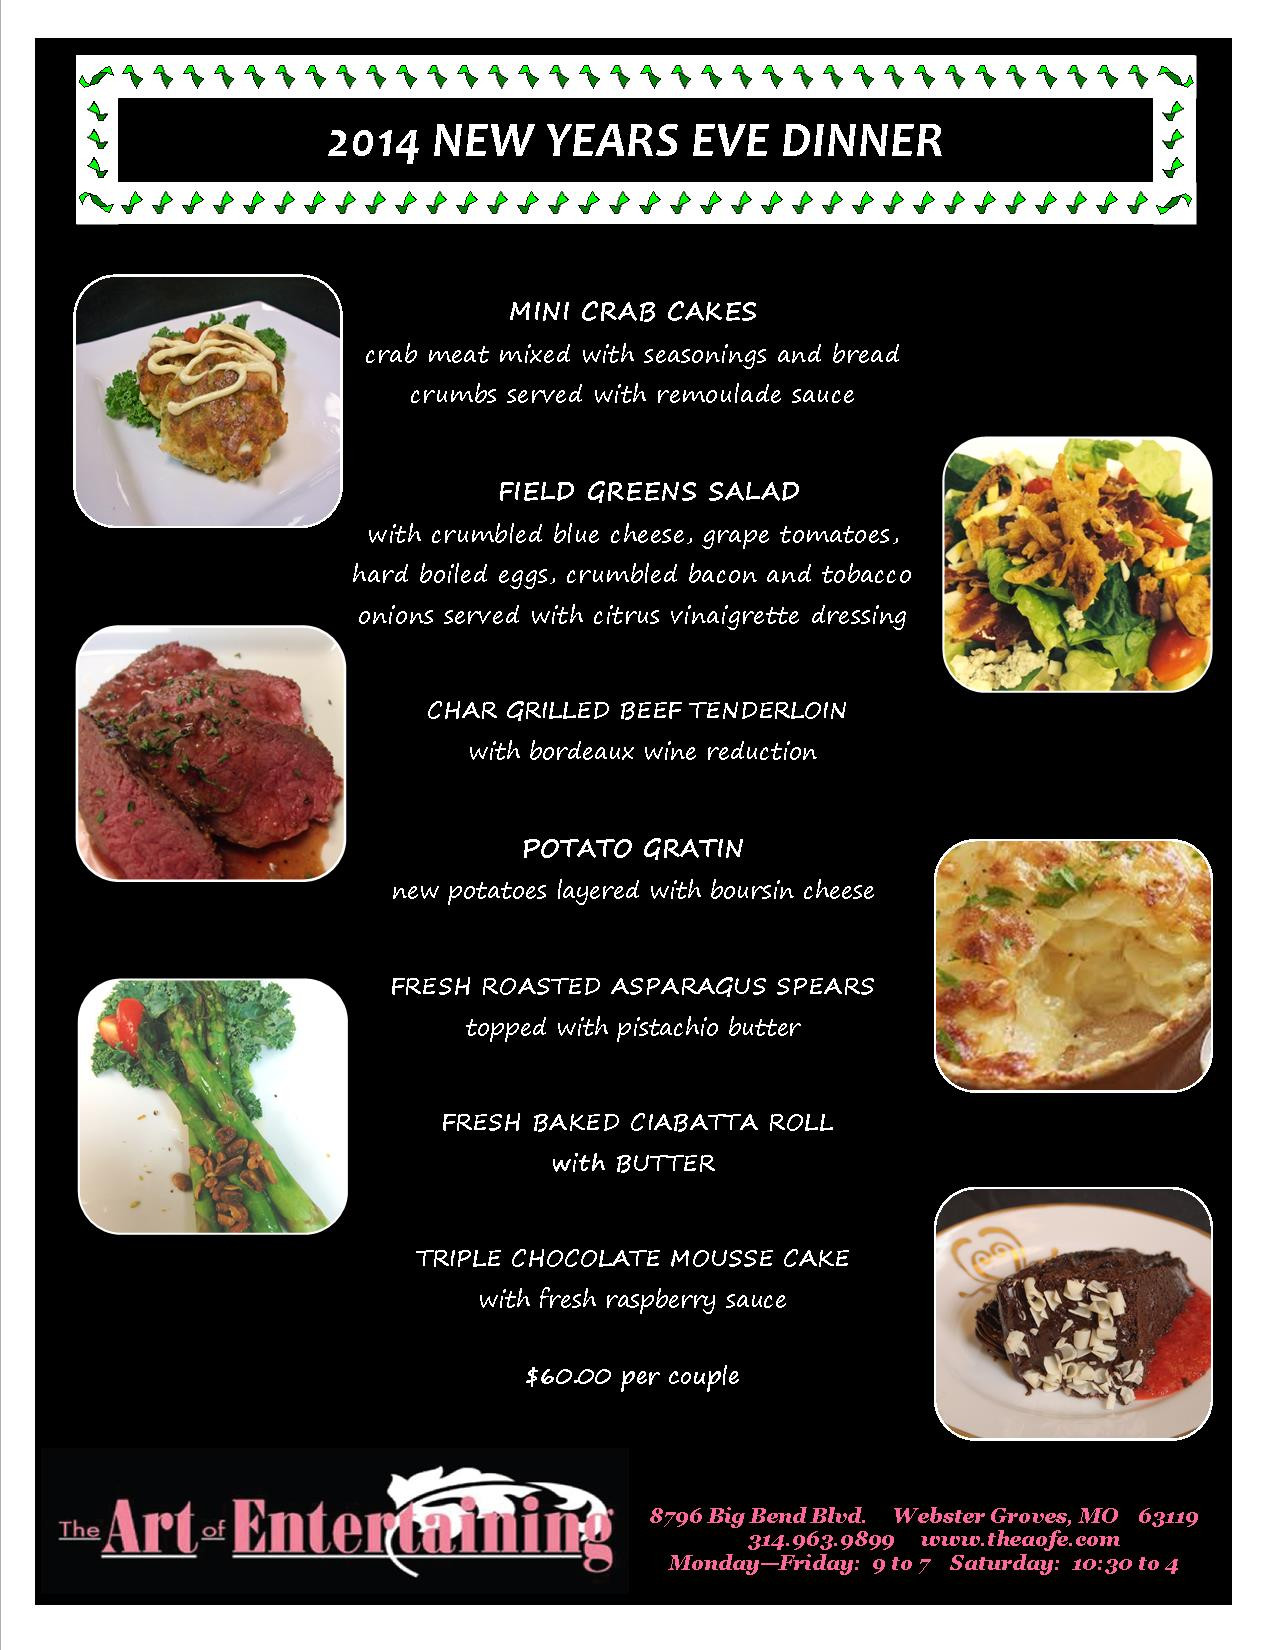 New Year Day Dinner Menu
 The Art of Entertaining The Art of Entertaining